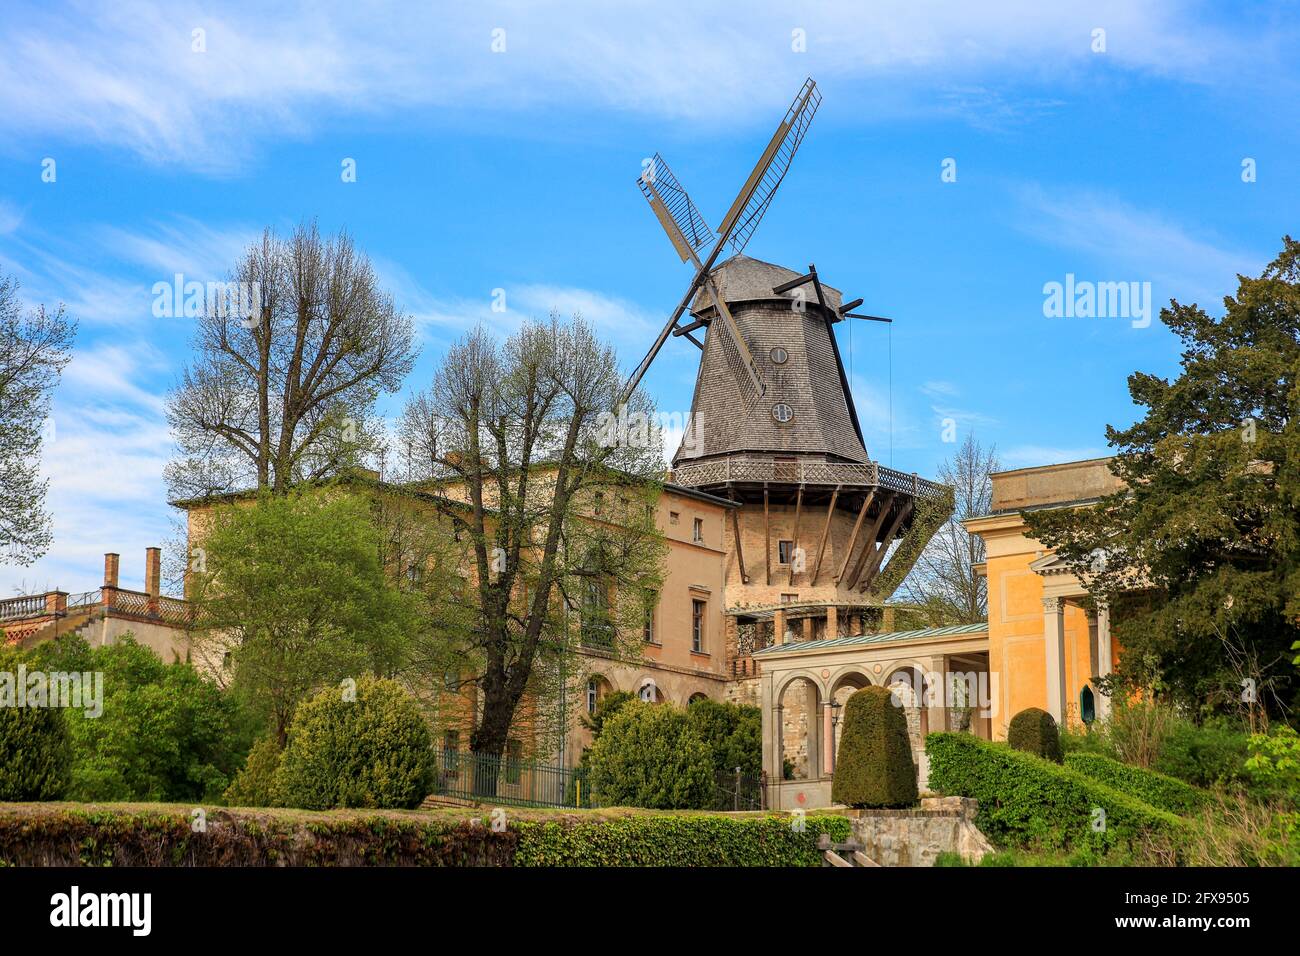 Old windmill made of wood . Blue sky on the background Stock Photo